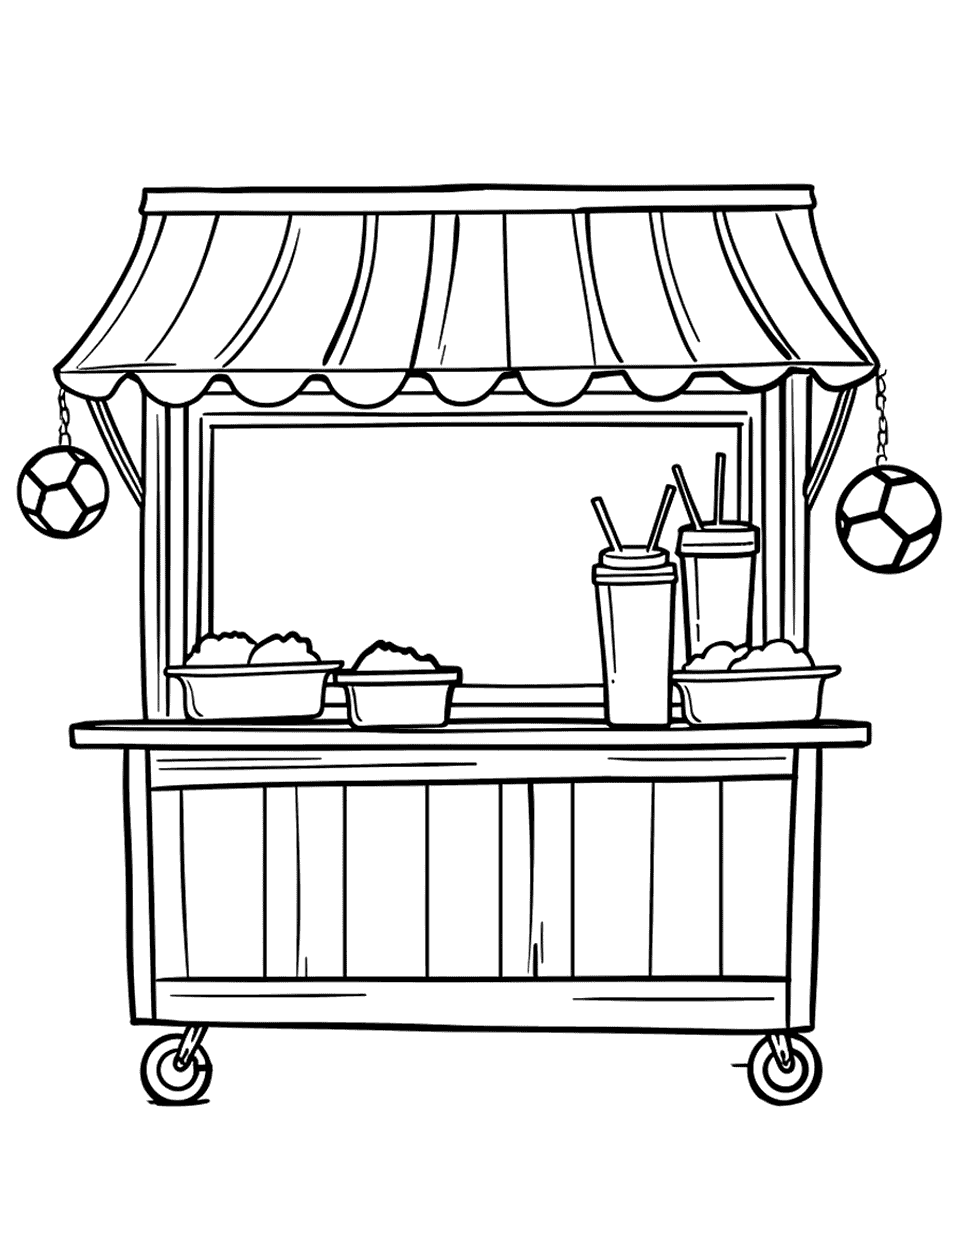 Stadium Concession Stand Soccer Coloring Page - A simple concession stand outside the soccer stadium, with snacks and drinks.